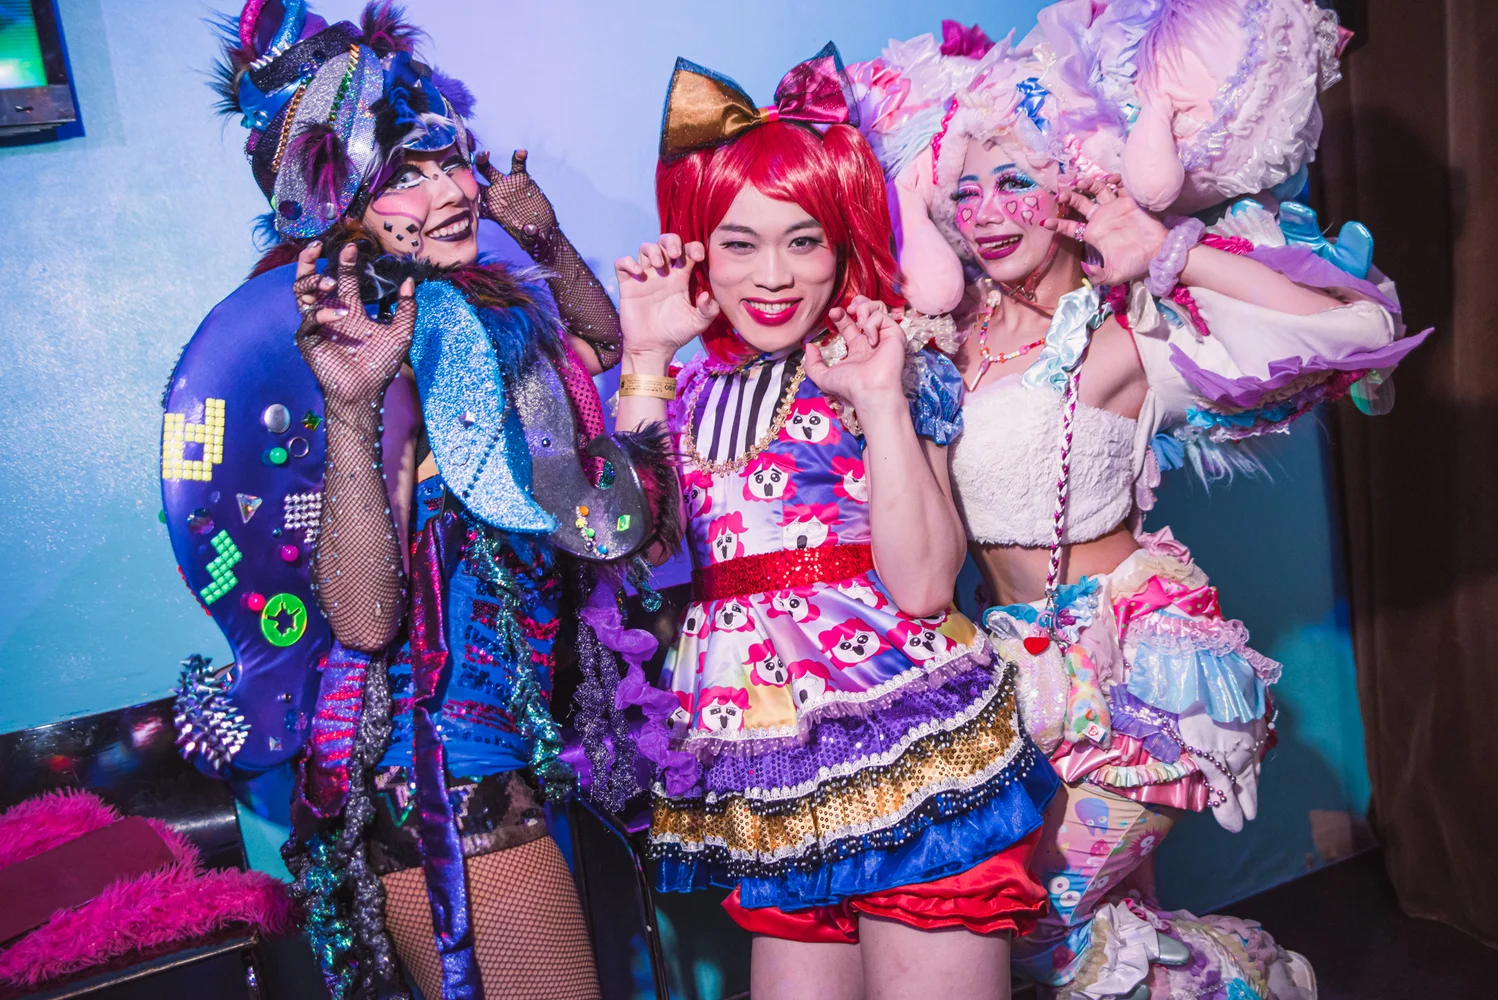 Kawaii Monster Party Feb 23, 2023 | 10% Off for Rakuten Employees vs Same-Day Tickets On-Site!